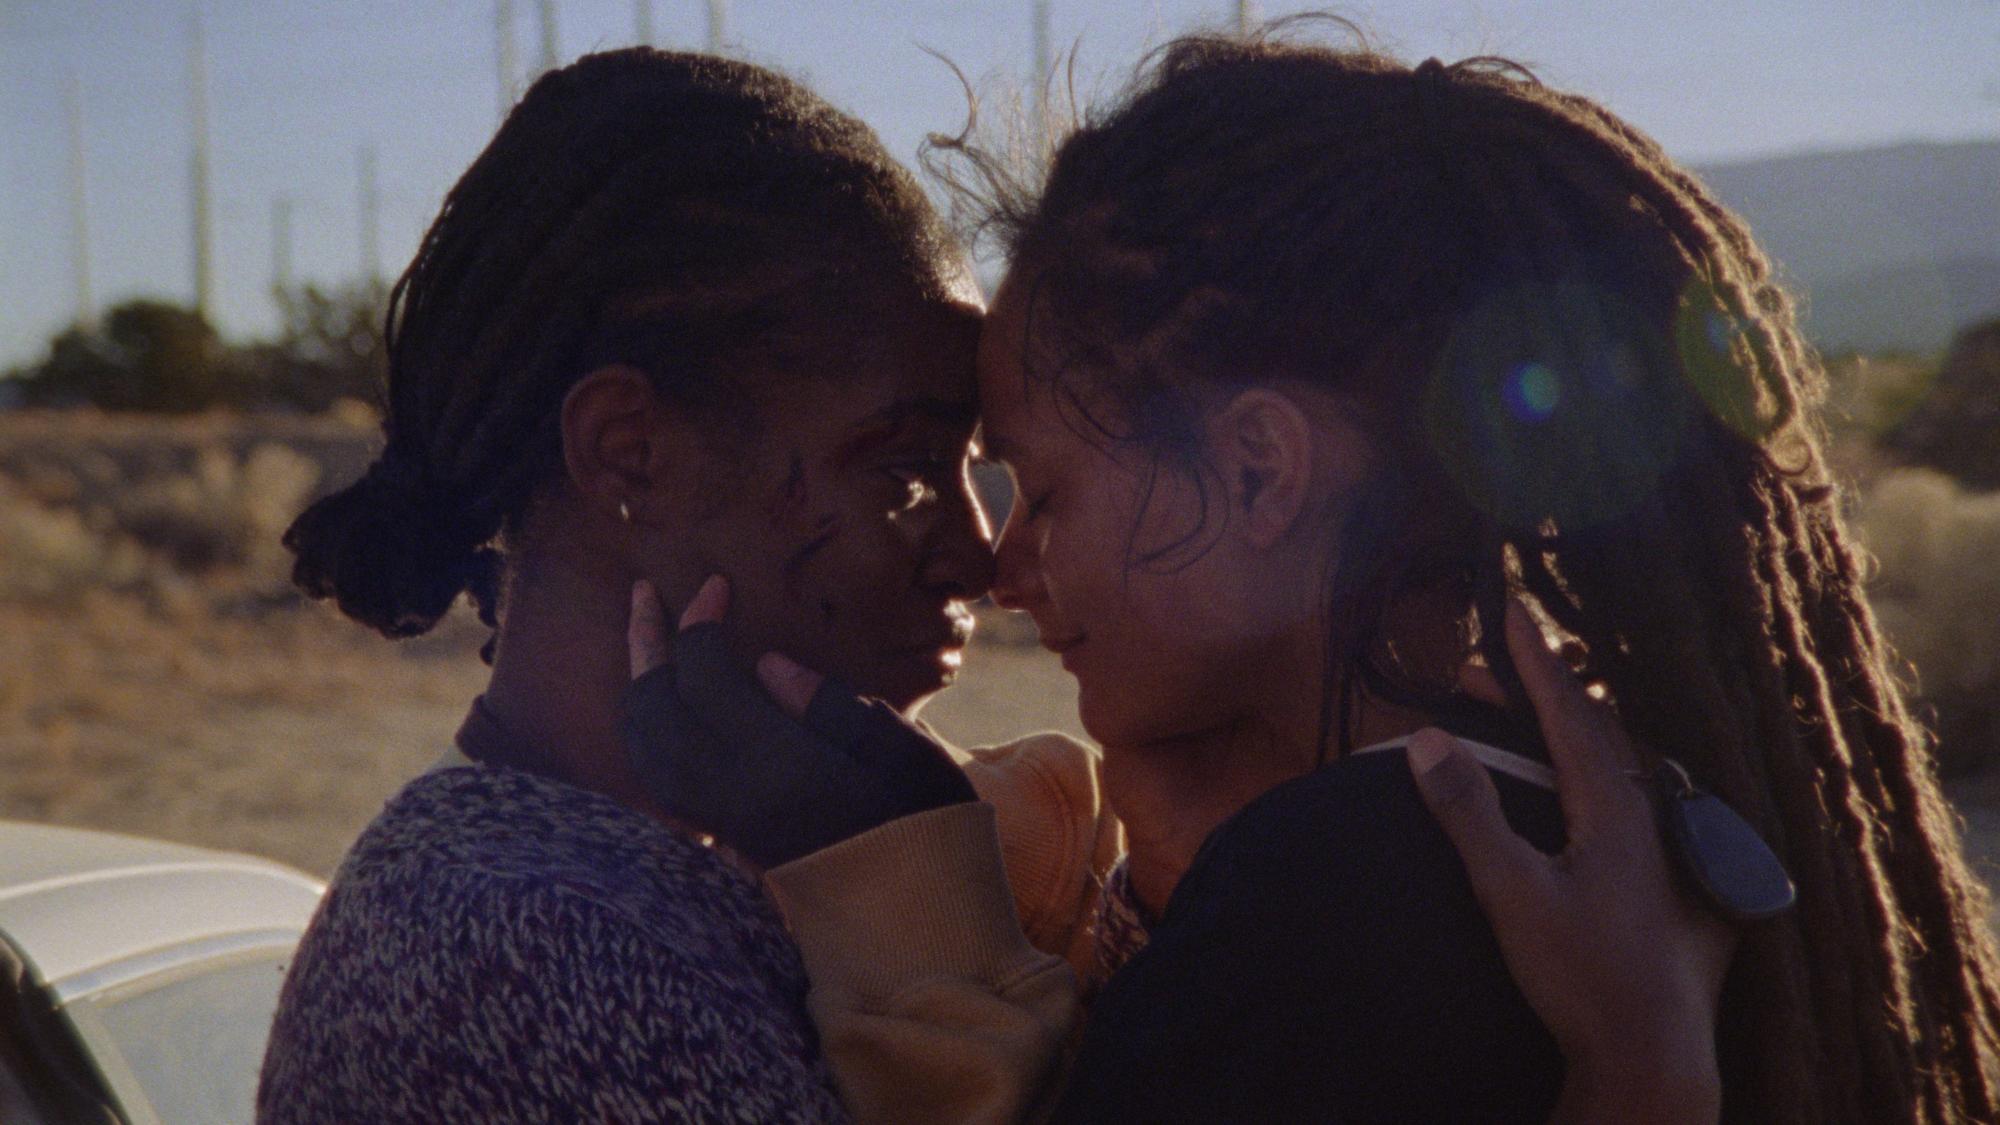 'How to Blow Up a Pipeline' Jayme Lawson as Alisha and Sasha Lane as Theo embracing one another in the desert. Alisha is covered in bruises and cuts.